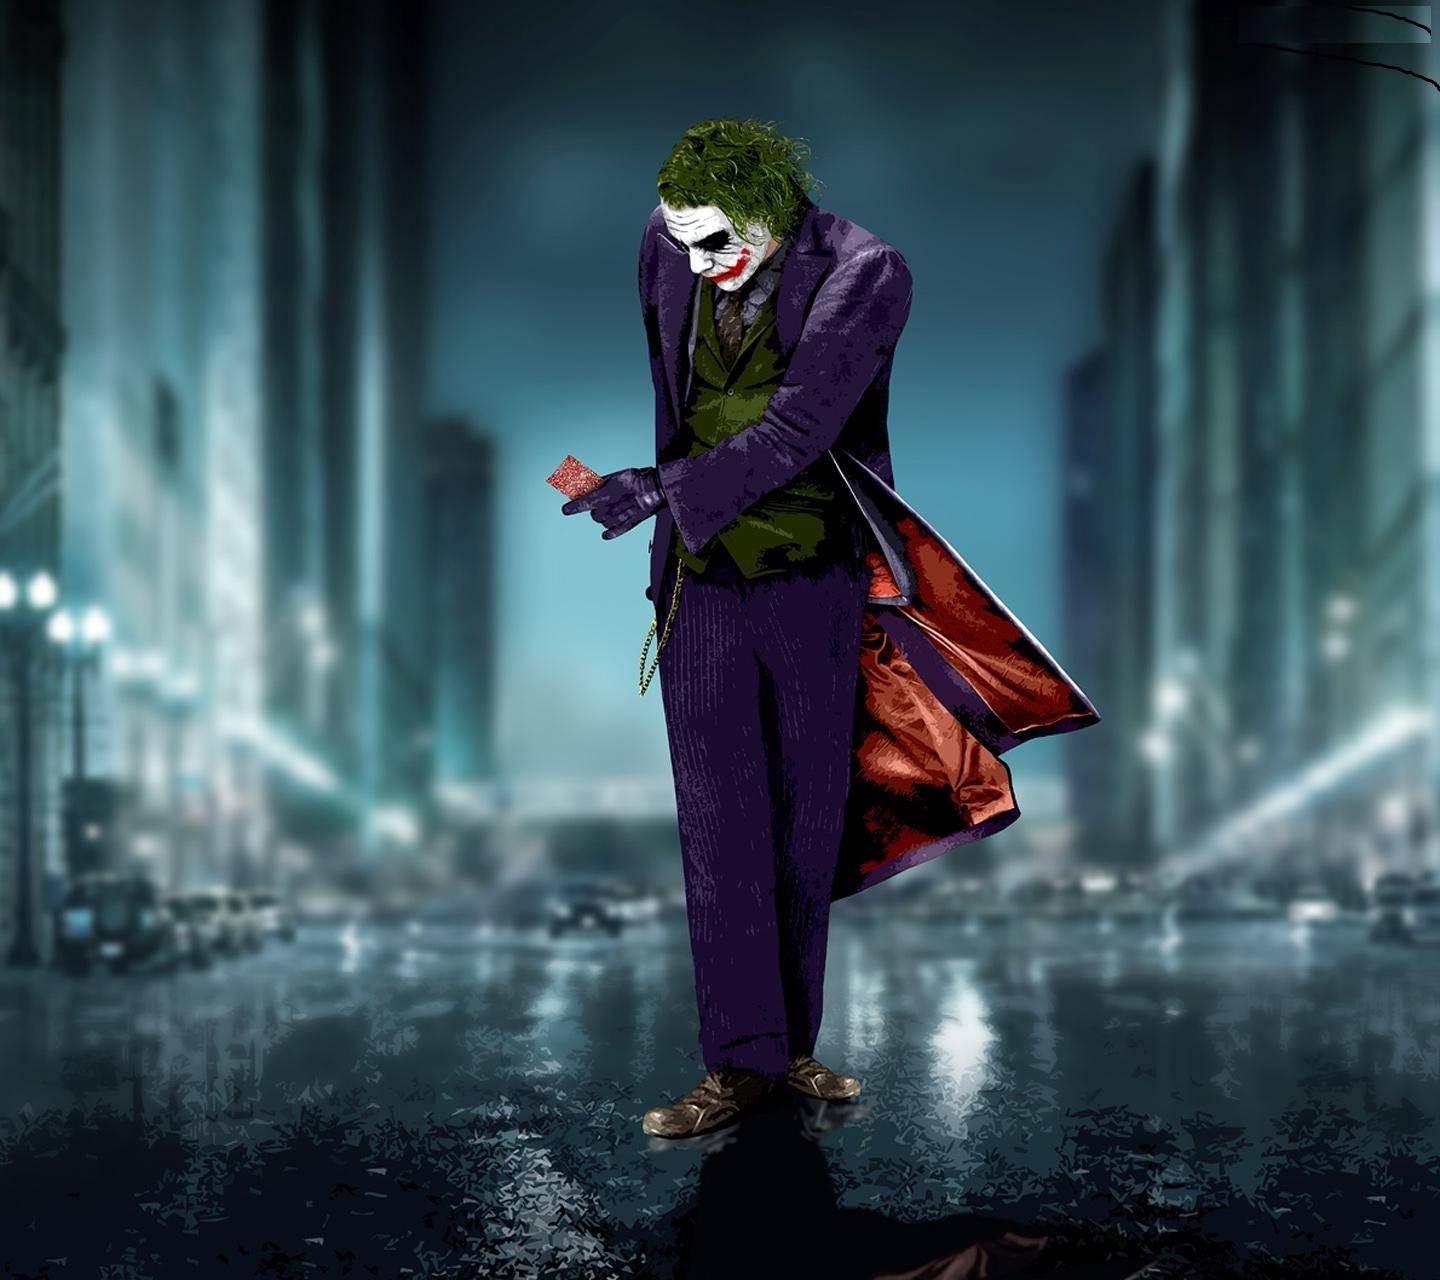 Download free joker HD wallpaper for your mobile phone